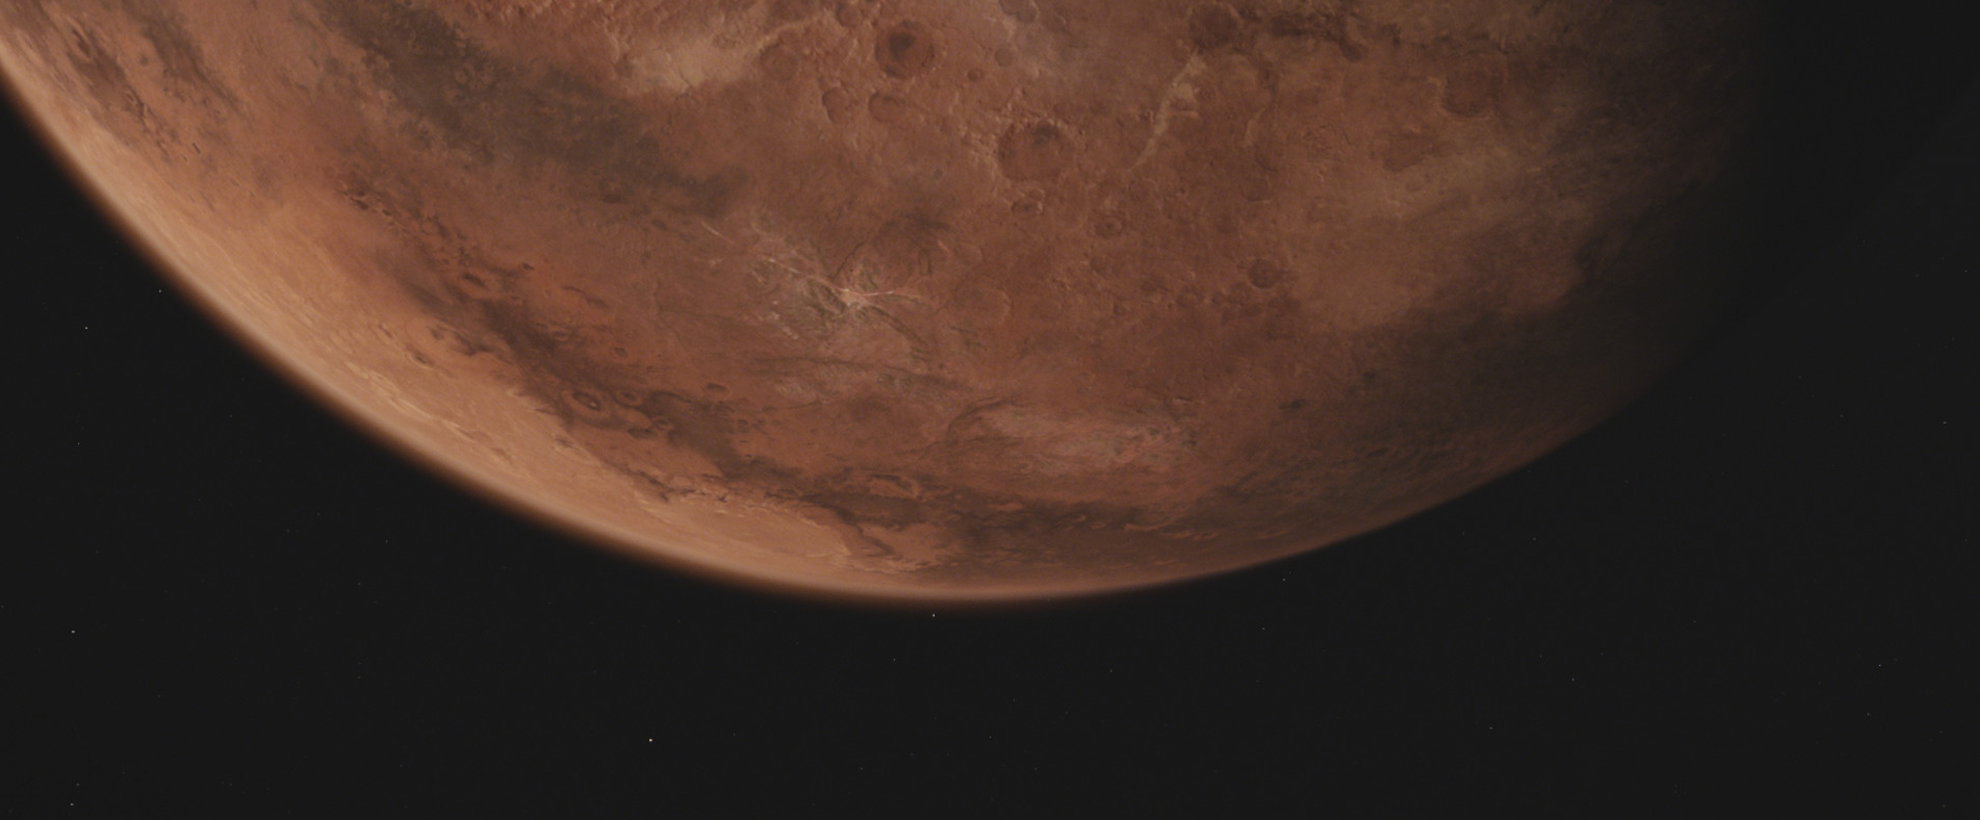 A shot of Mars from space